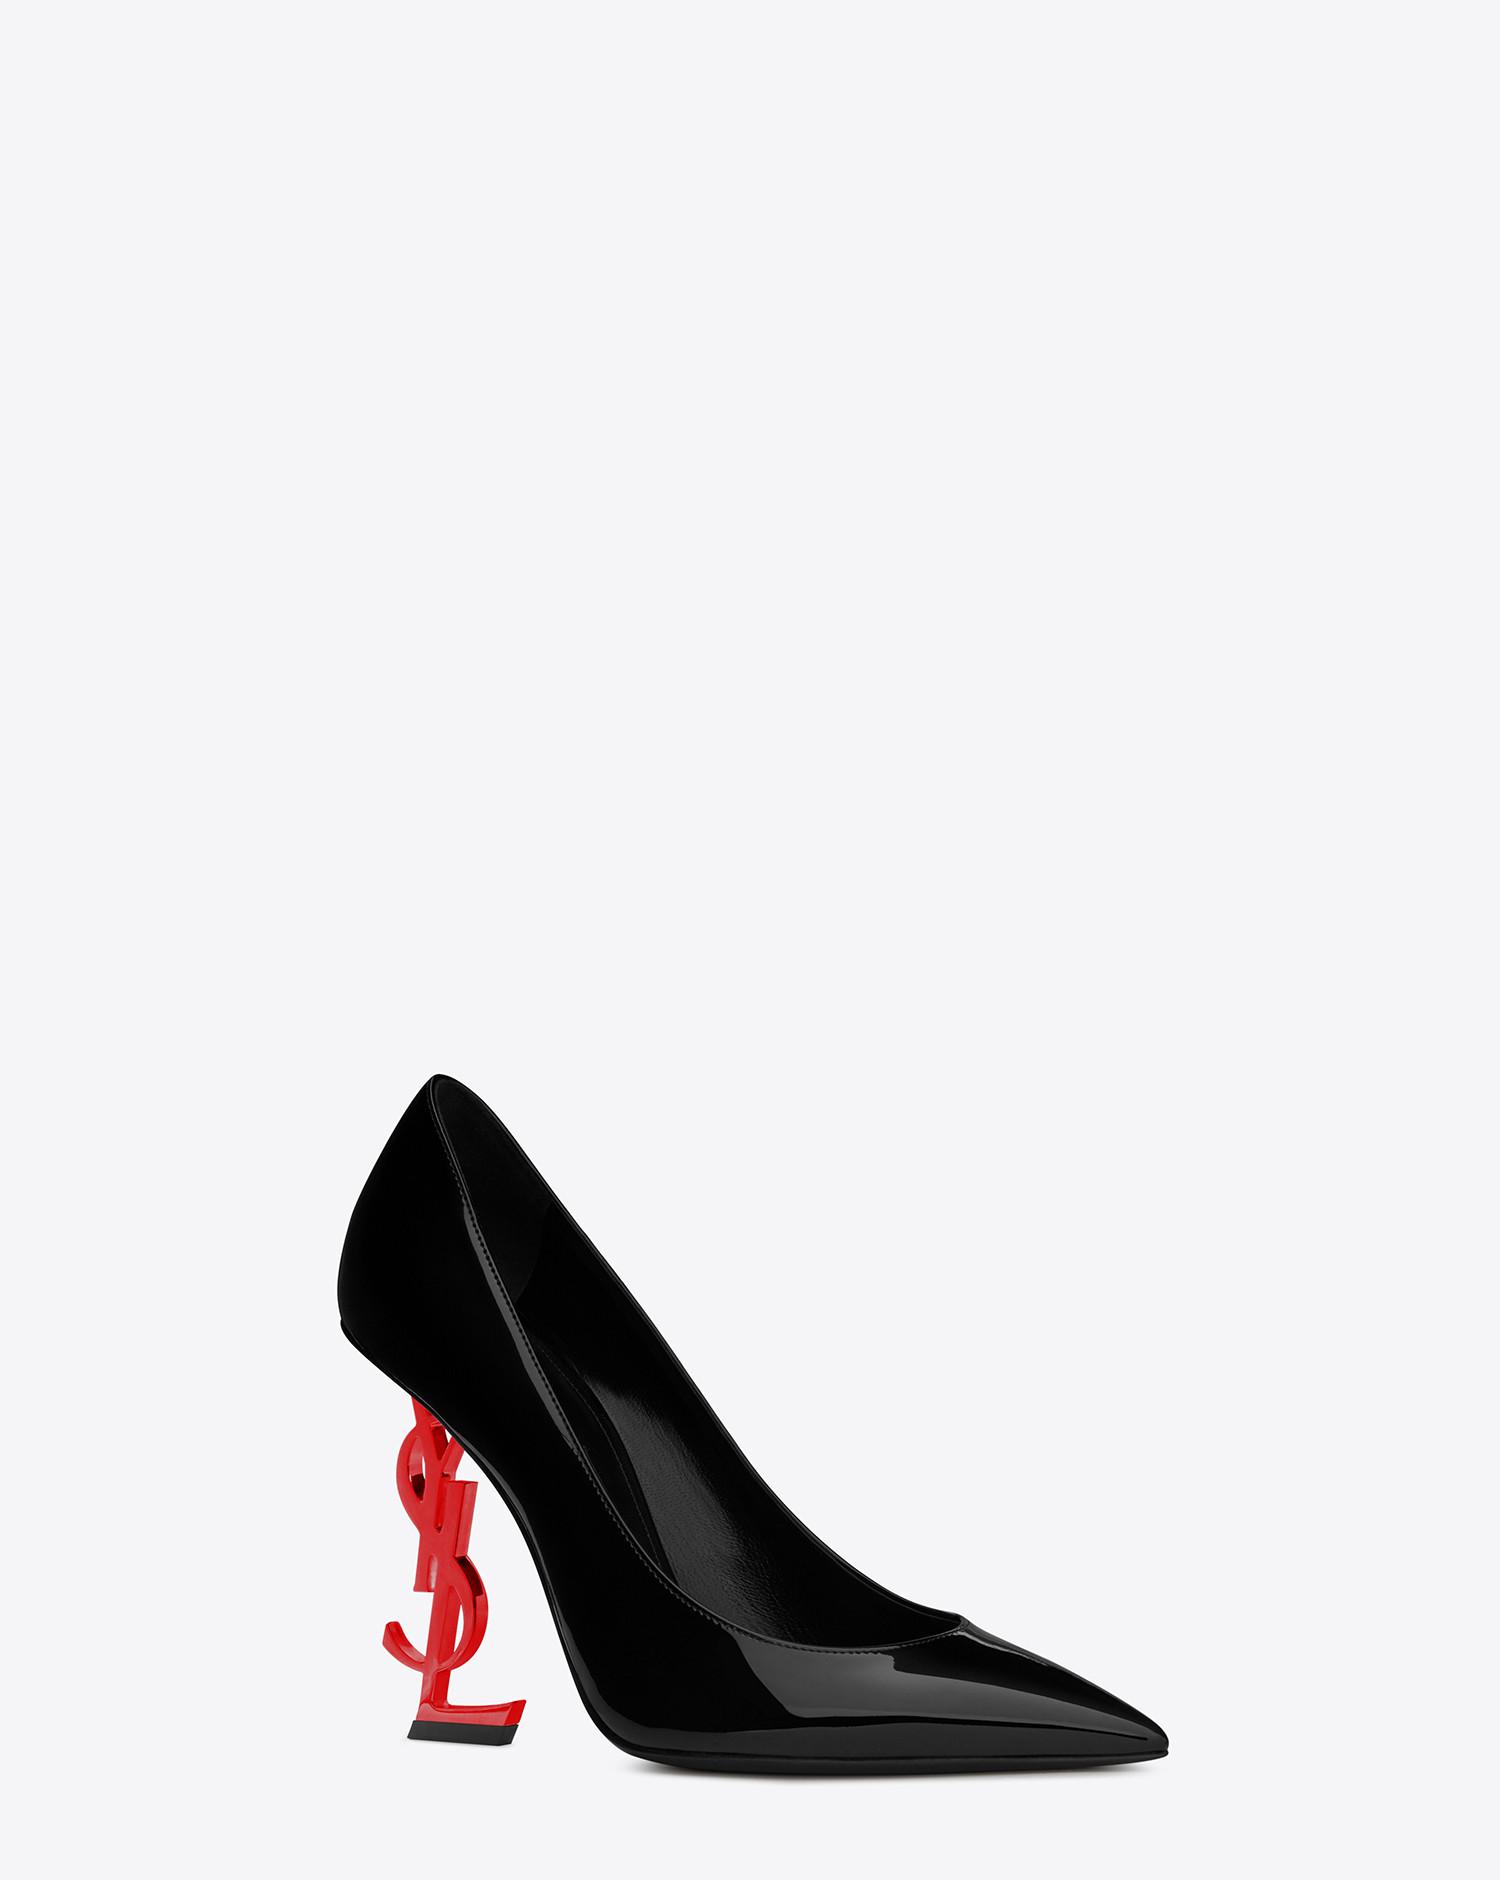 Saint Laurent Opyum 110 Pump In Black Patent Leather And Red Metal